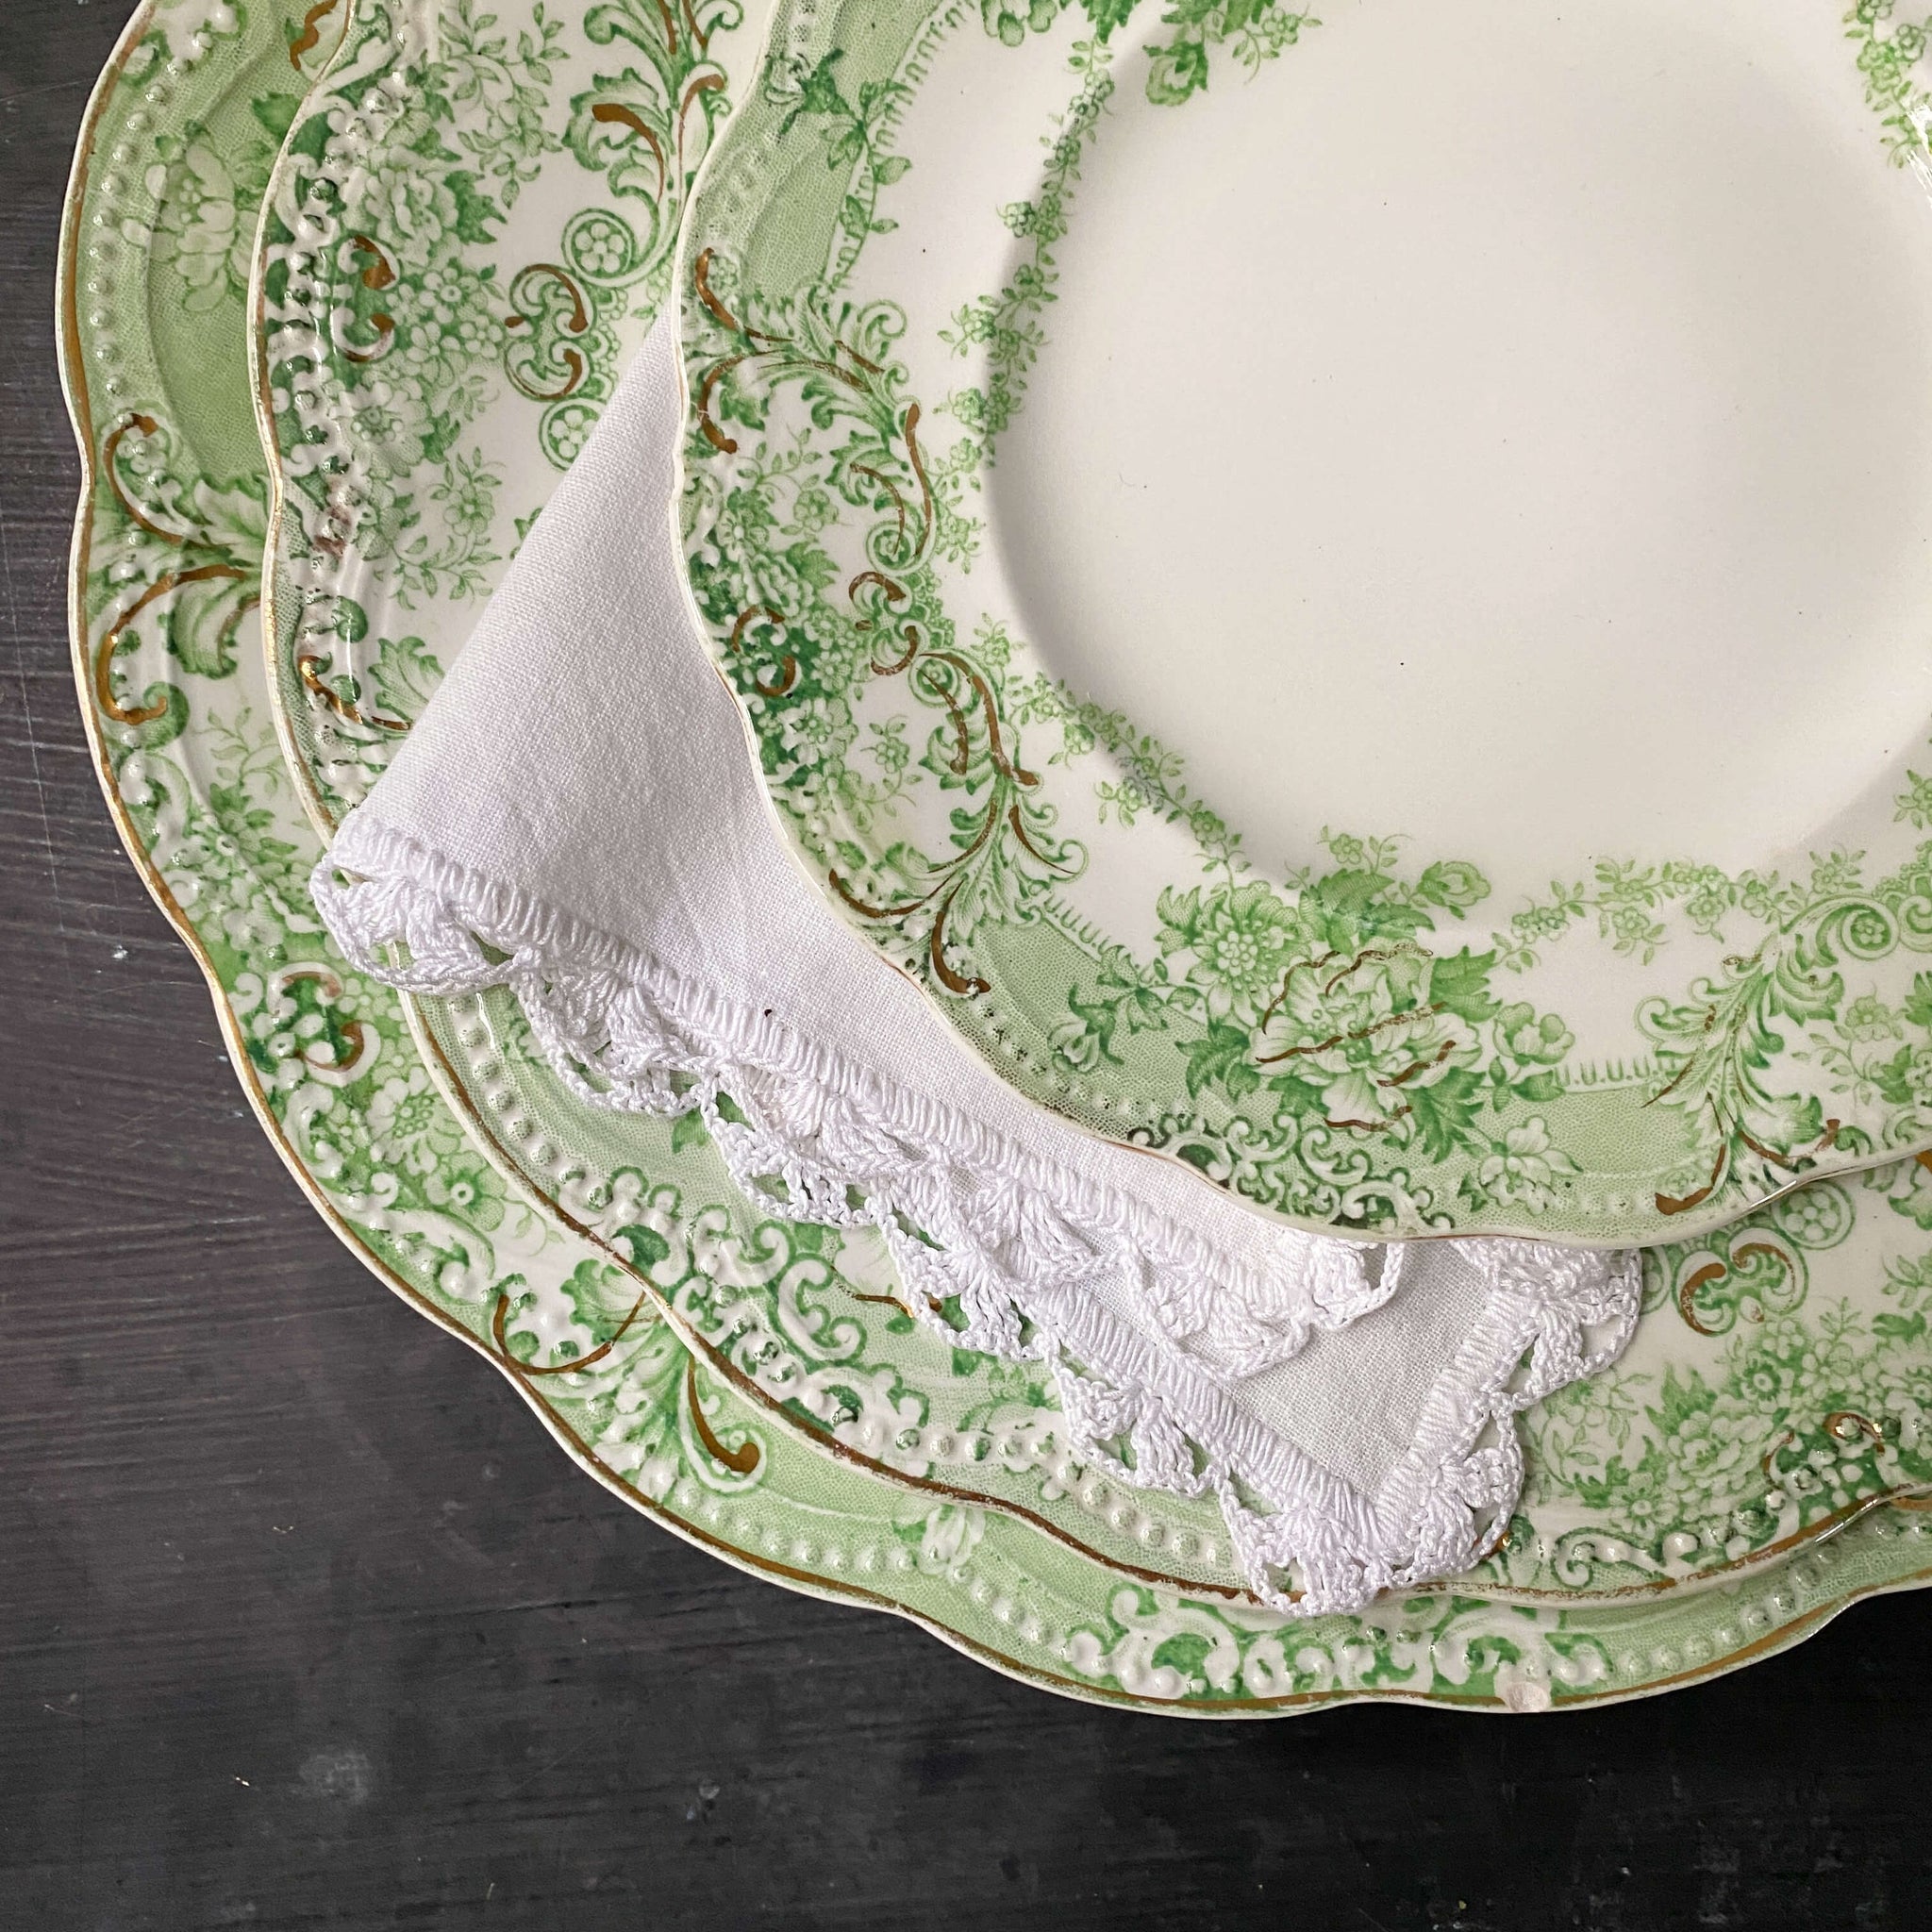 Antique Johnson Brothers Florentine Place Setting - Dinner, Lunch & Bread Plate Set circa 1913